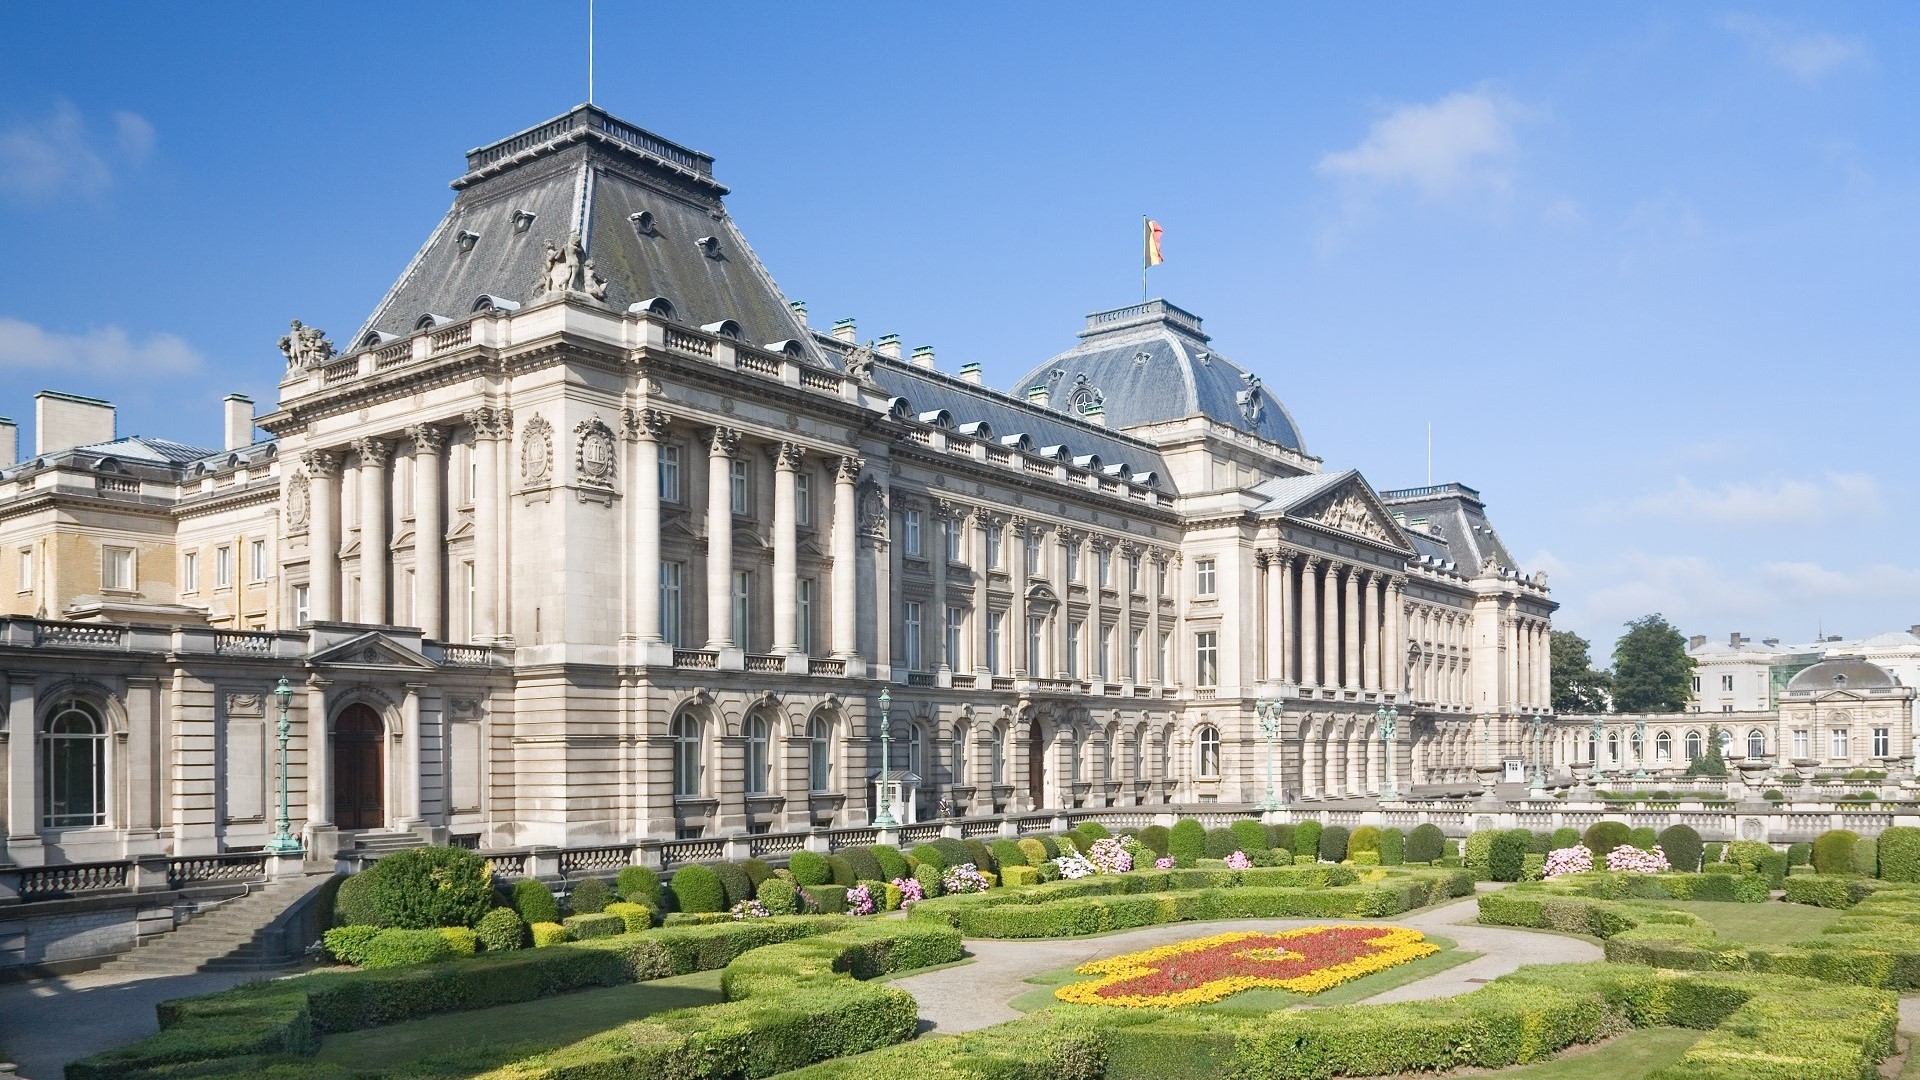 gardens and exterior of Brussels' Royal Palace